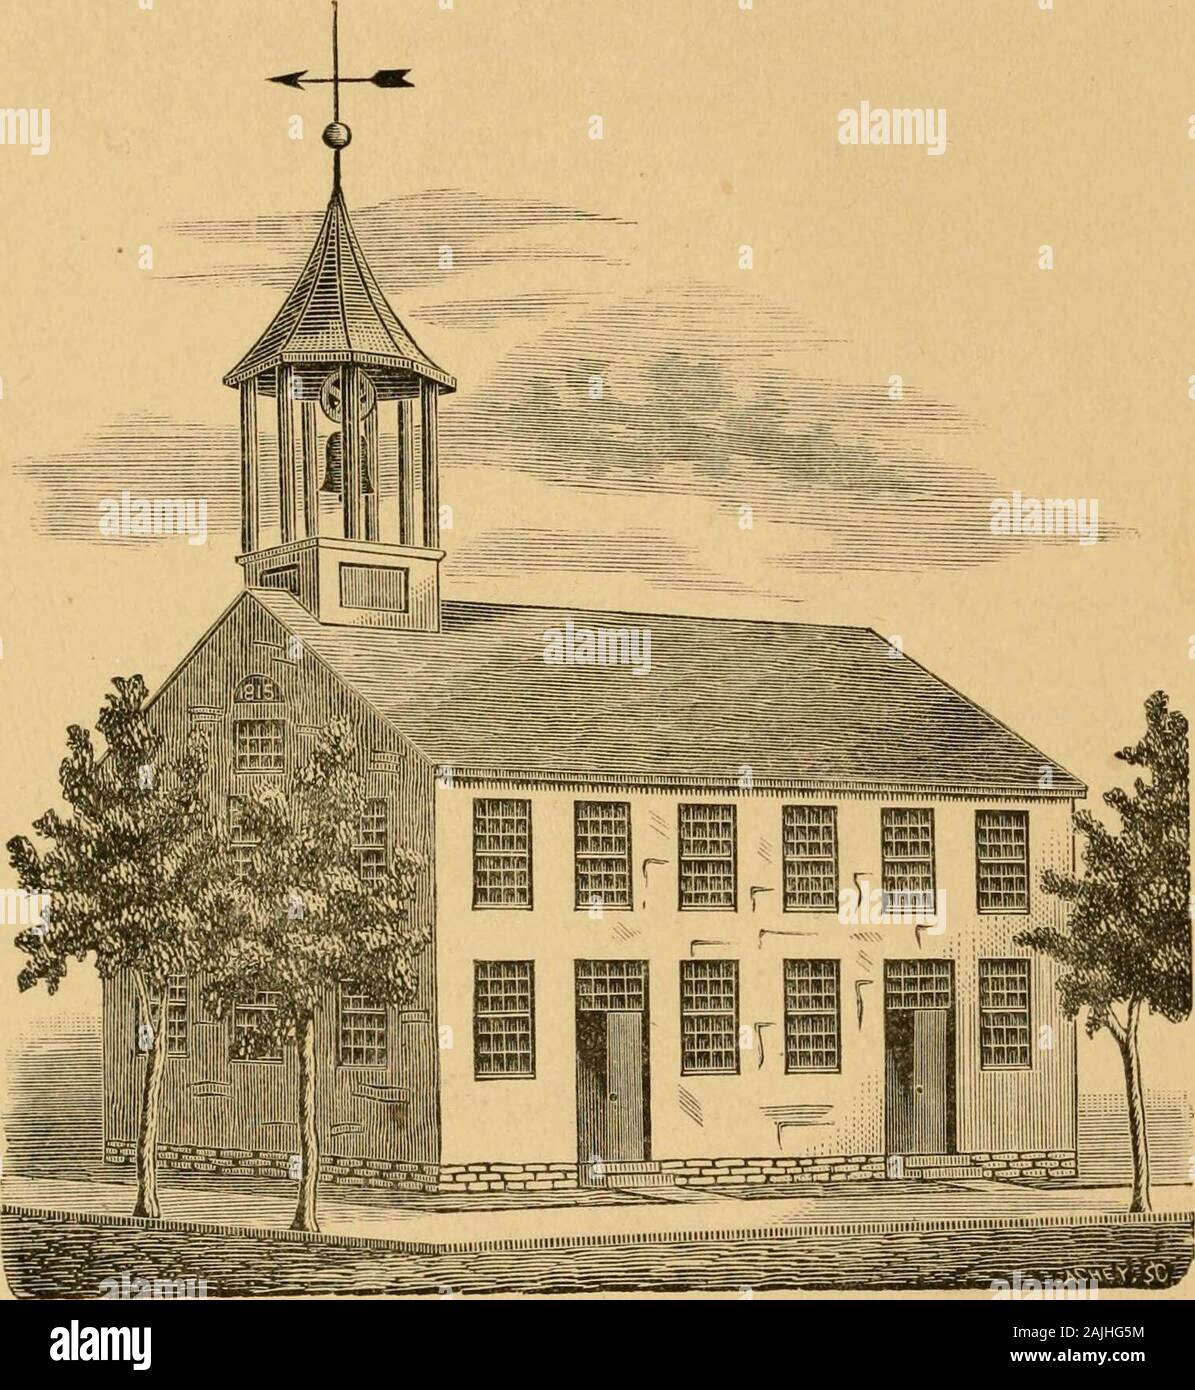 A history of the First Presbyterian Church of Dayton, Ohio : from 1845 to 1880 . y of the house of worship,but faith, perseverance, and good words prevailed and theblessing came. The trustees of the congregation, up tothe time of finishing the church, were John Miller, RobertEdgar, David Reid, John Ewing, John McCabe, D. C. • Cooper, James Hanna, Andrew Hood, William King,J. H. Williams, Hezekiah Robinson, Matthew Patton,James Steele, H. G. Phillips, Isaac G. Burnet, G. W.Smith, David Lindsley; clerks, David Reid, Rev. JamesWelsh, Benjamin Van Cleve, Job Haines, and JamesSteele; treasurers, W. Stock Photo